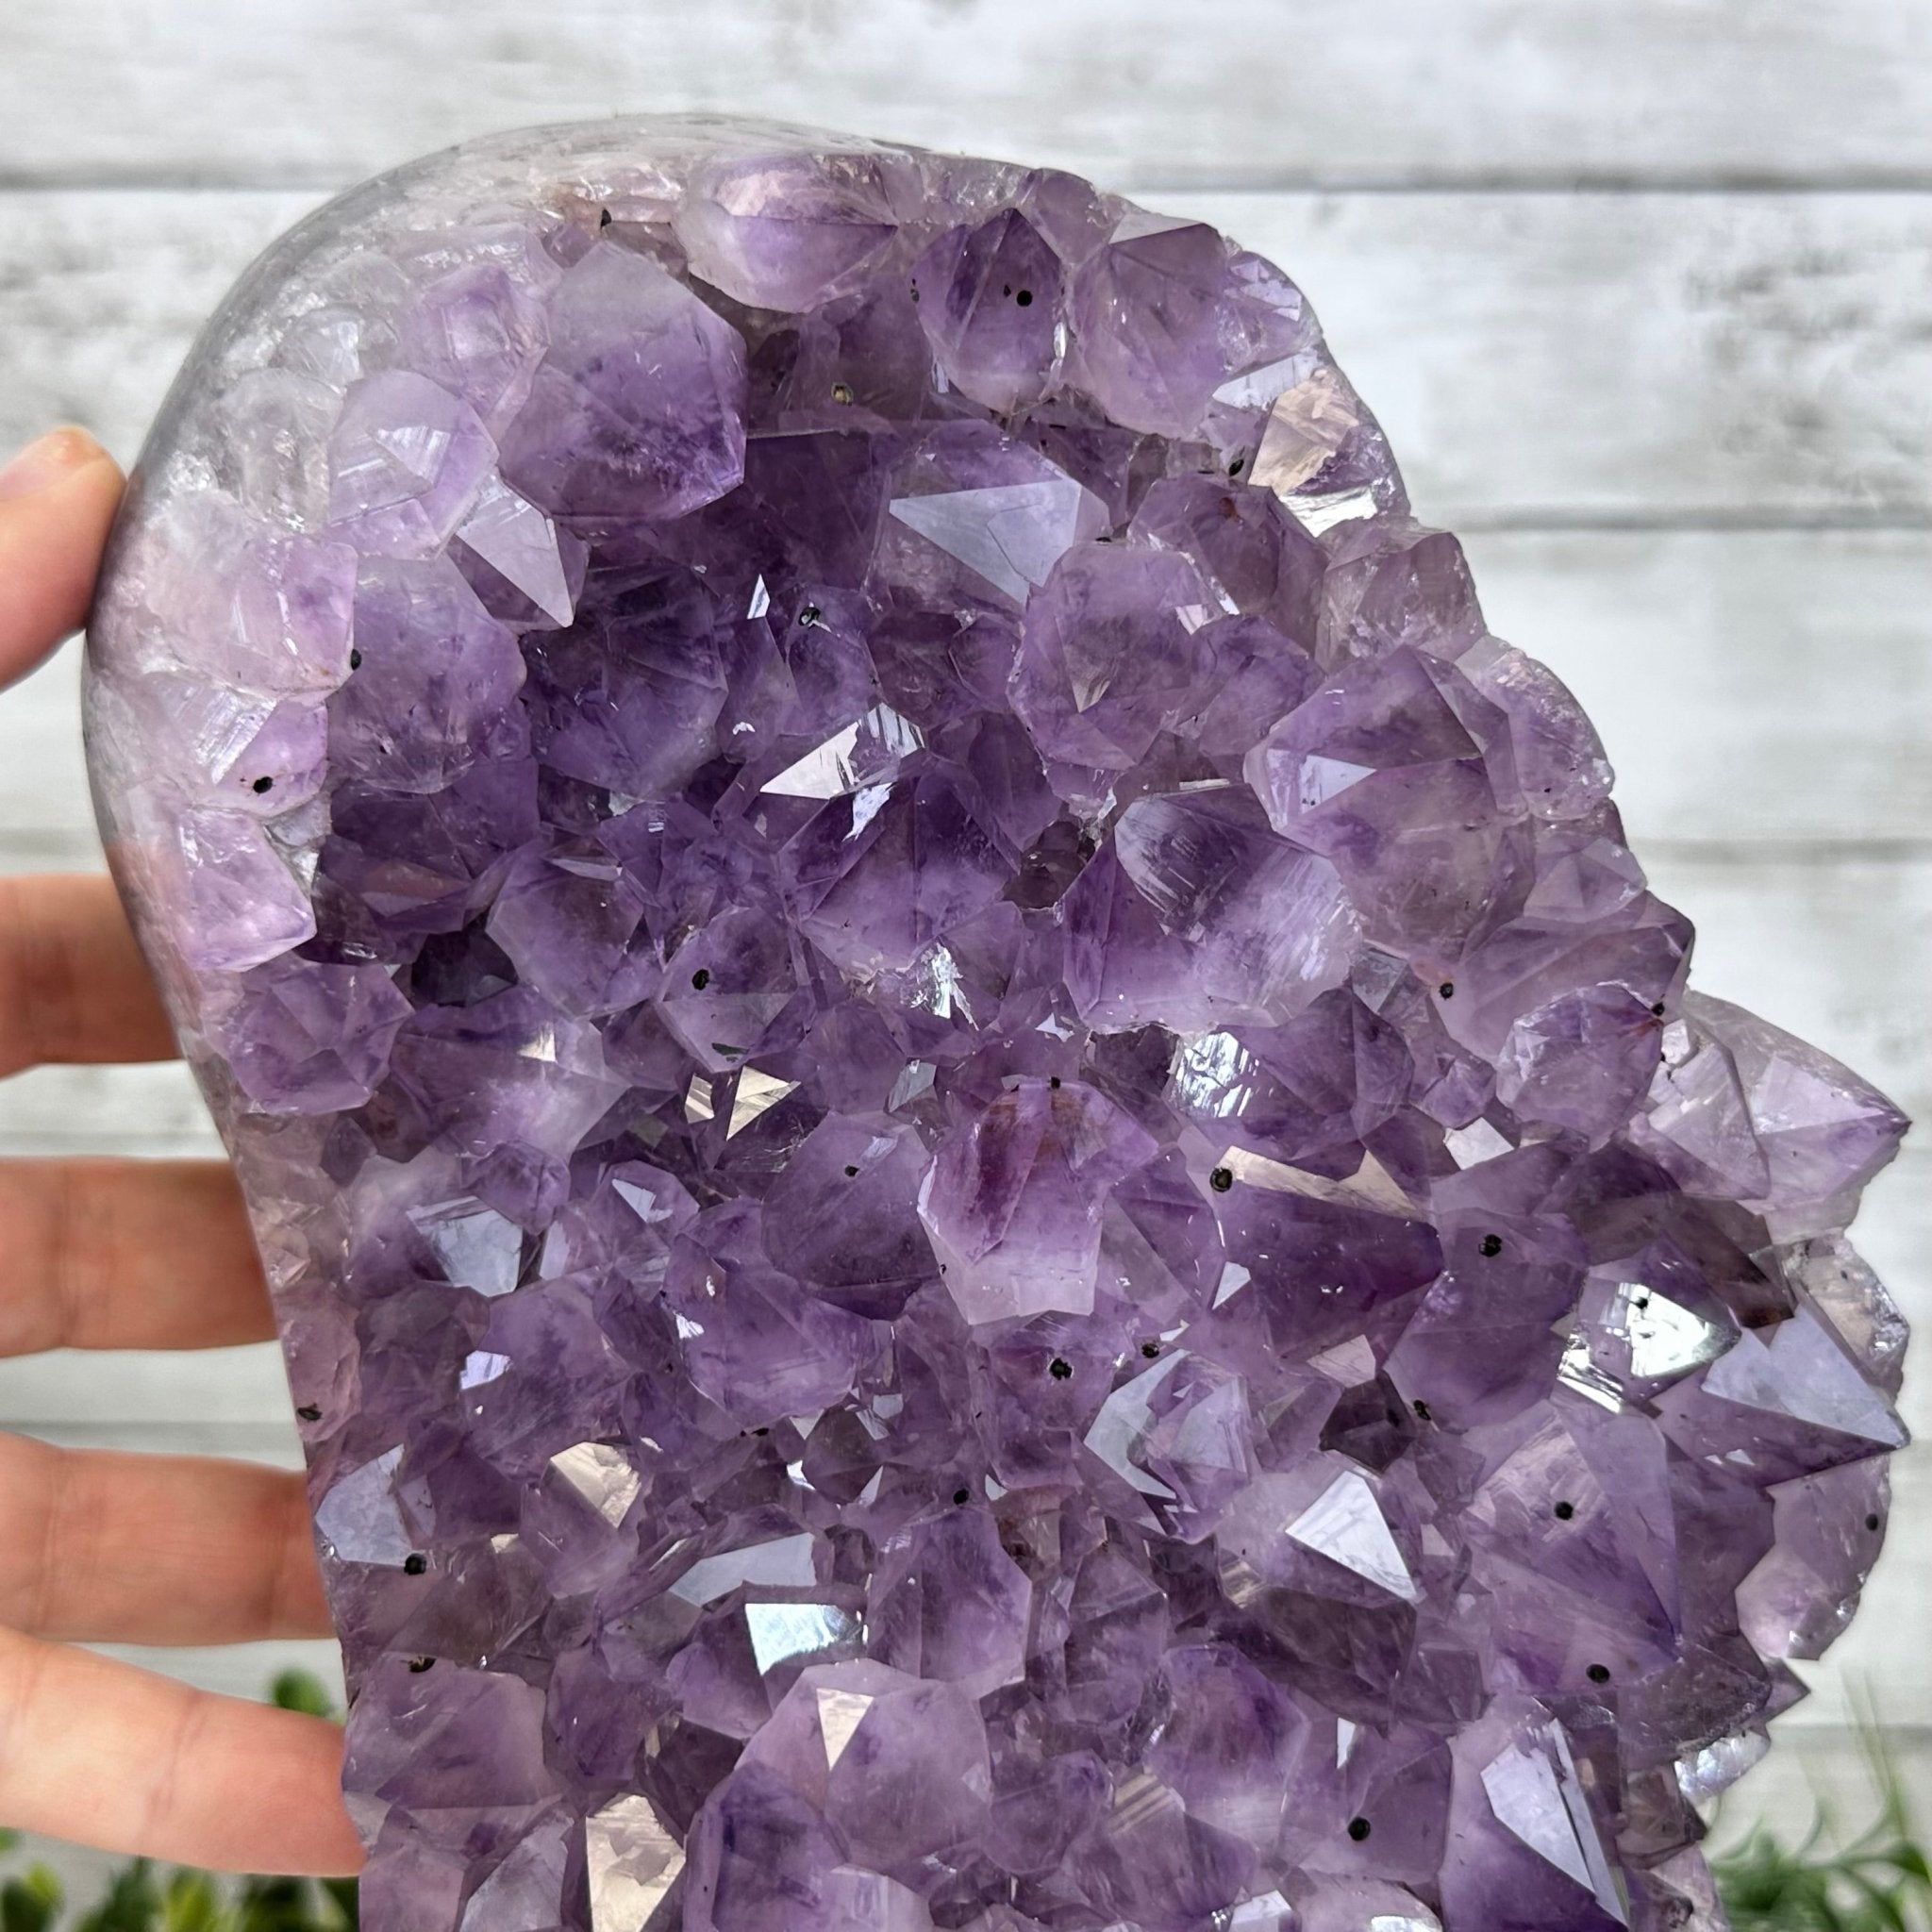 Extra Quality Amethyst Cluster on Cement Base, 13.3 lbs and 12.6" Tall #5614-0106 - Brazil GemsBrazil GemsExtra Quality Amethyst Cluster on Cement Base, 13.3 lbs and 12.6" Tall #5614-0106Clusters on Cement Bases5614-0106